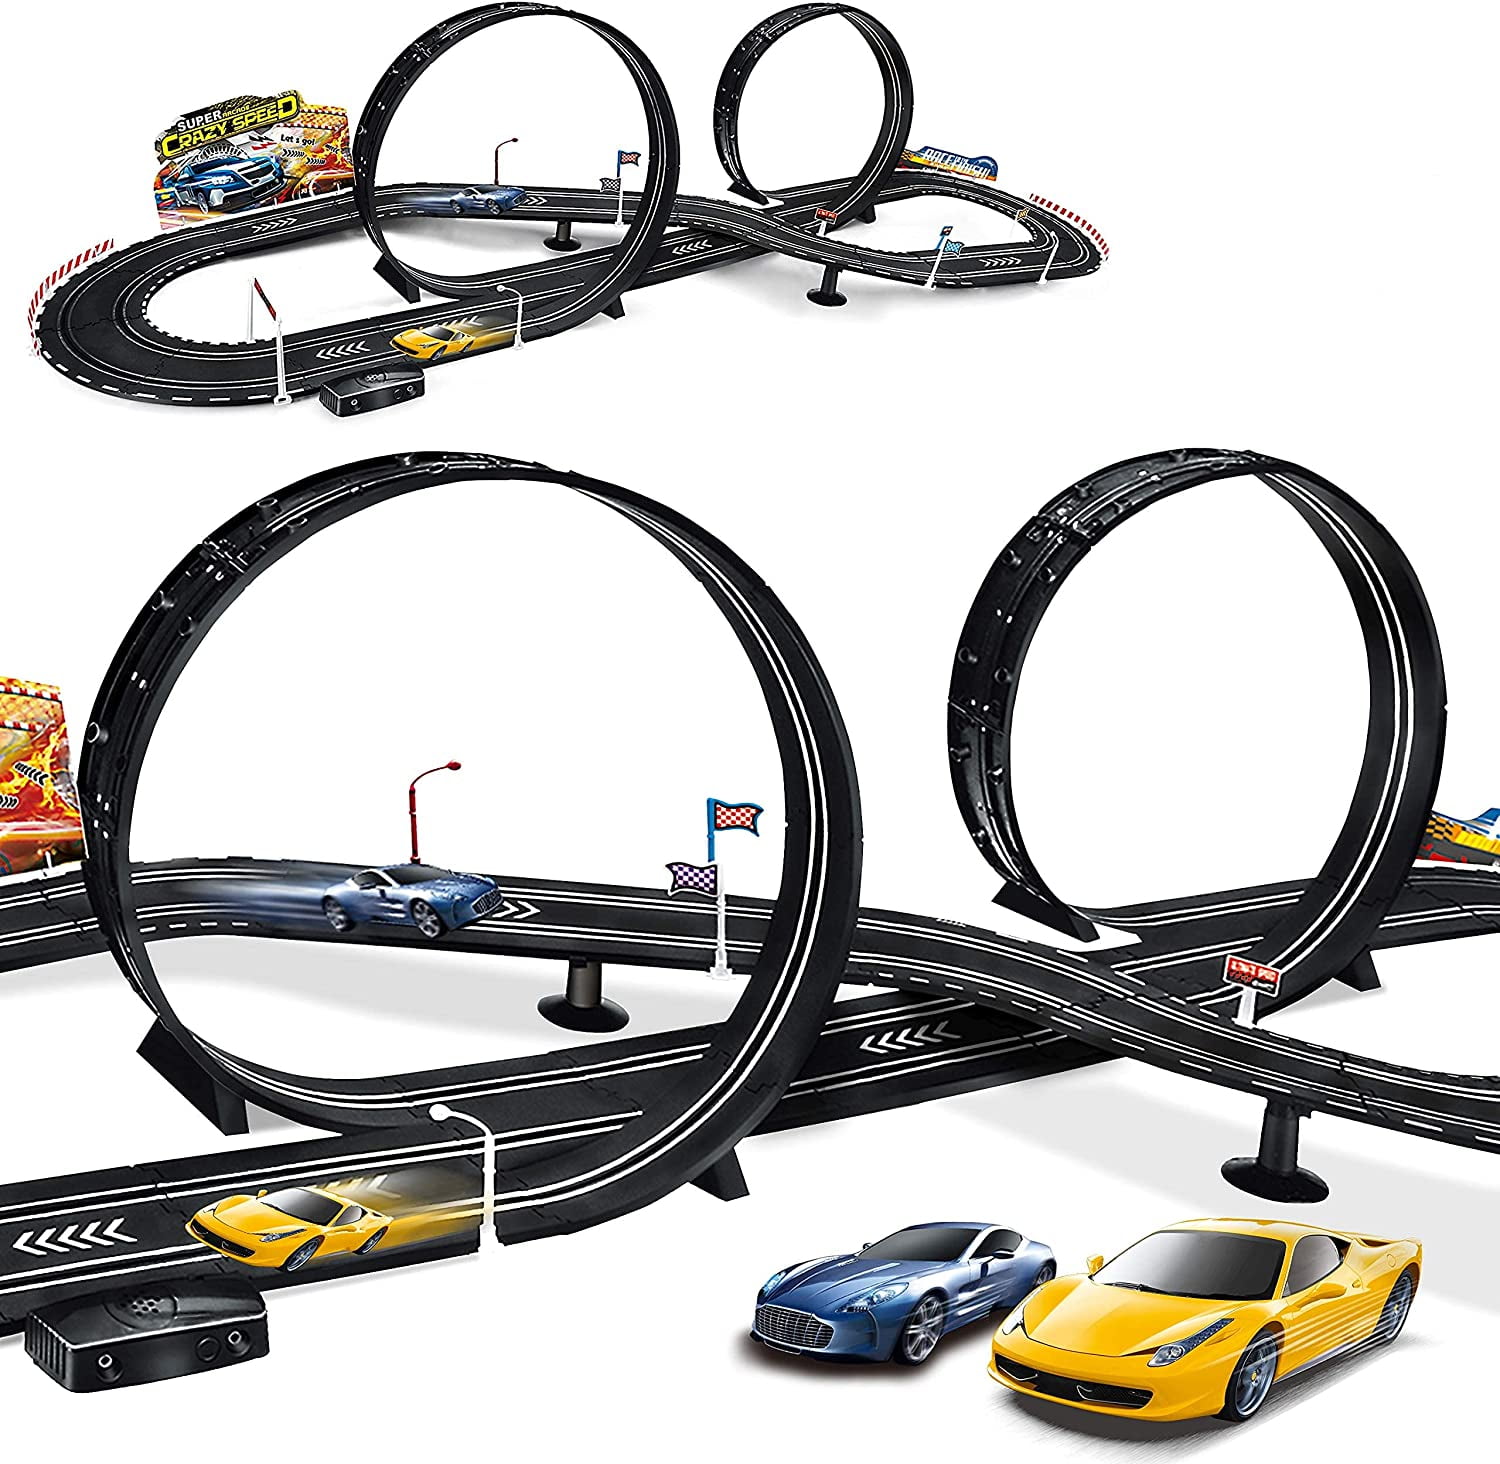 Electric Slot Car Race Track Set Kids Toy With 2 Cars and Two Controllers for sale online 